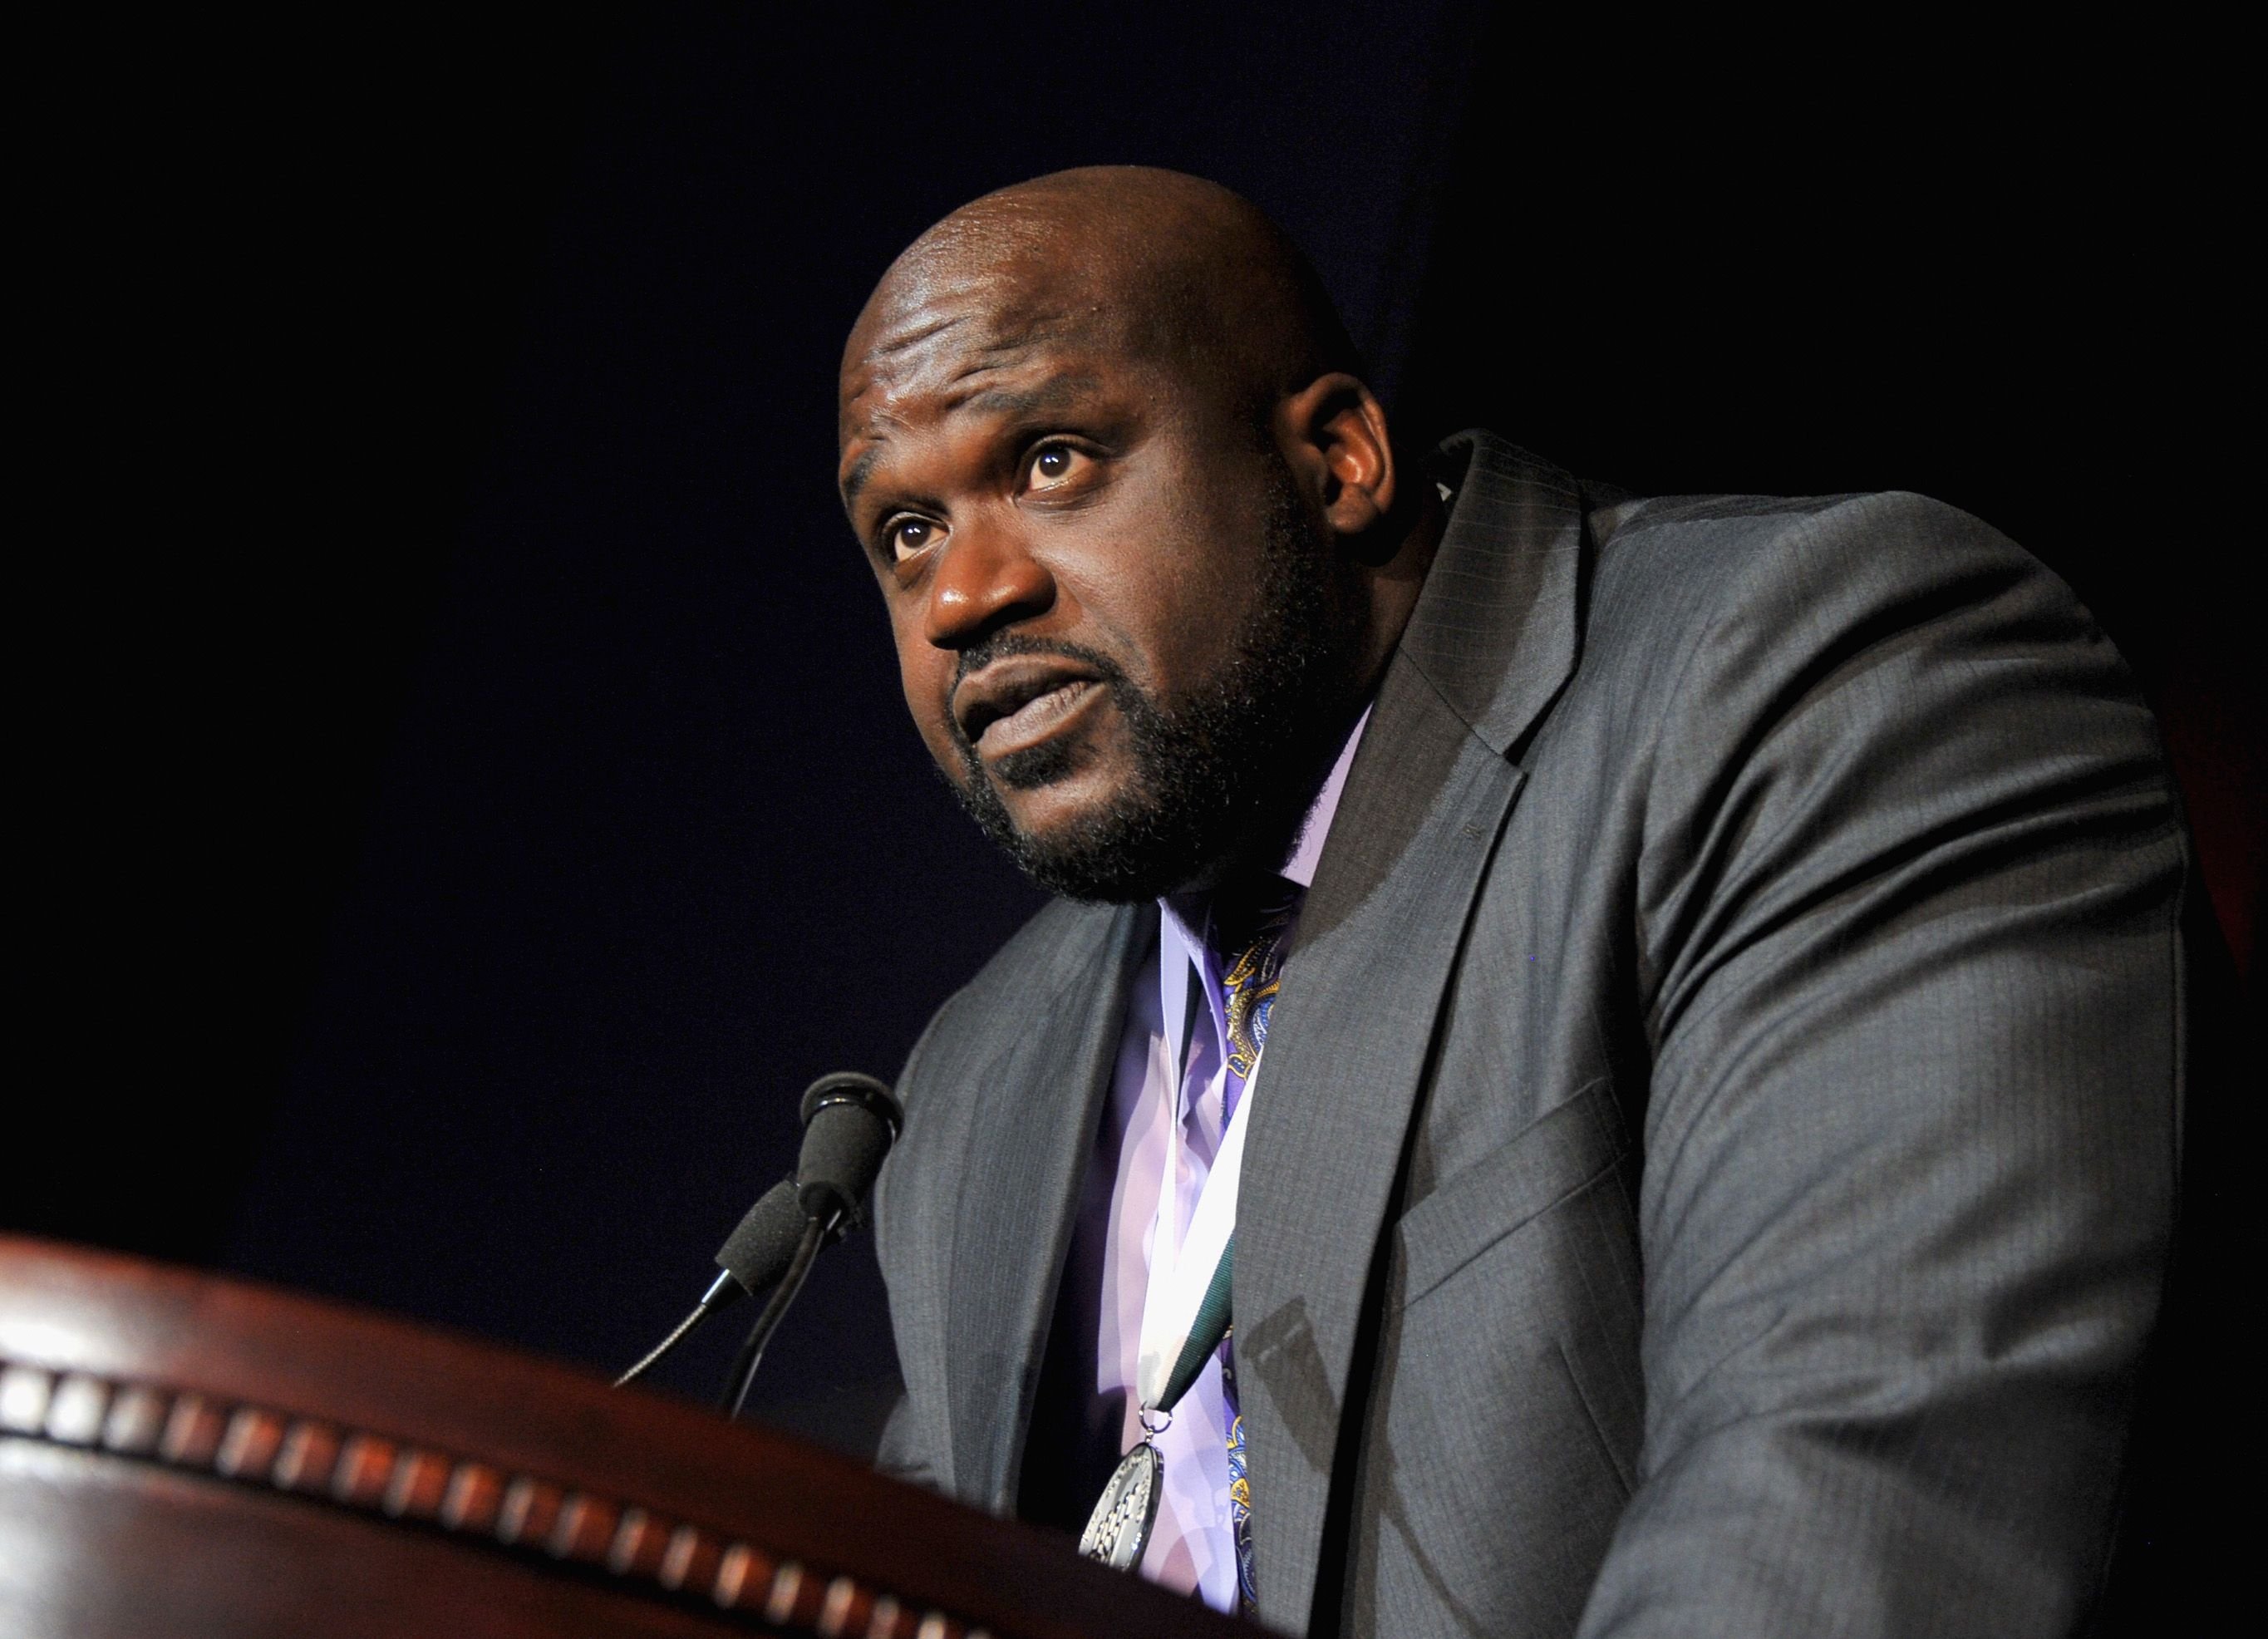 Shaquille O'Neal speaks onstage at the 27th Annual Great Sports Legends Dinner to benefit the Buoniconti Fund to Cure Paralysis at The Waldorf=Astoria on September 24, 2012 | Photo: Getty Images